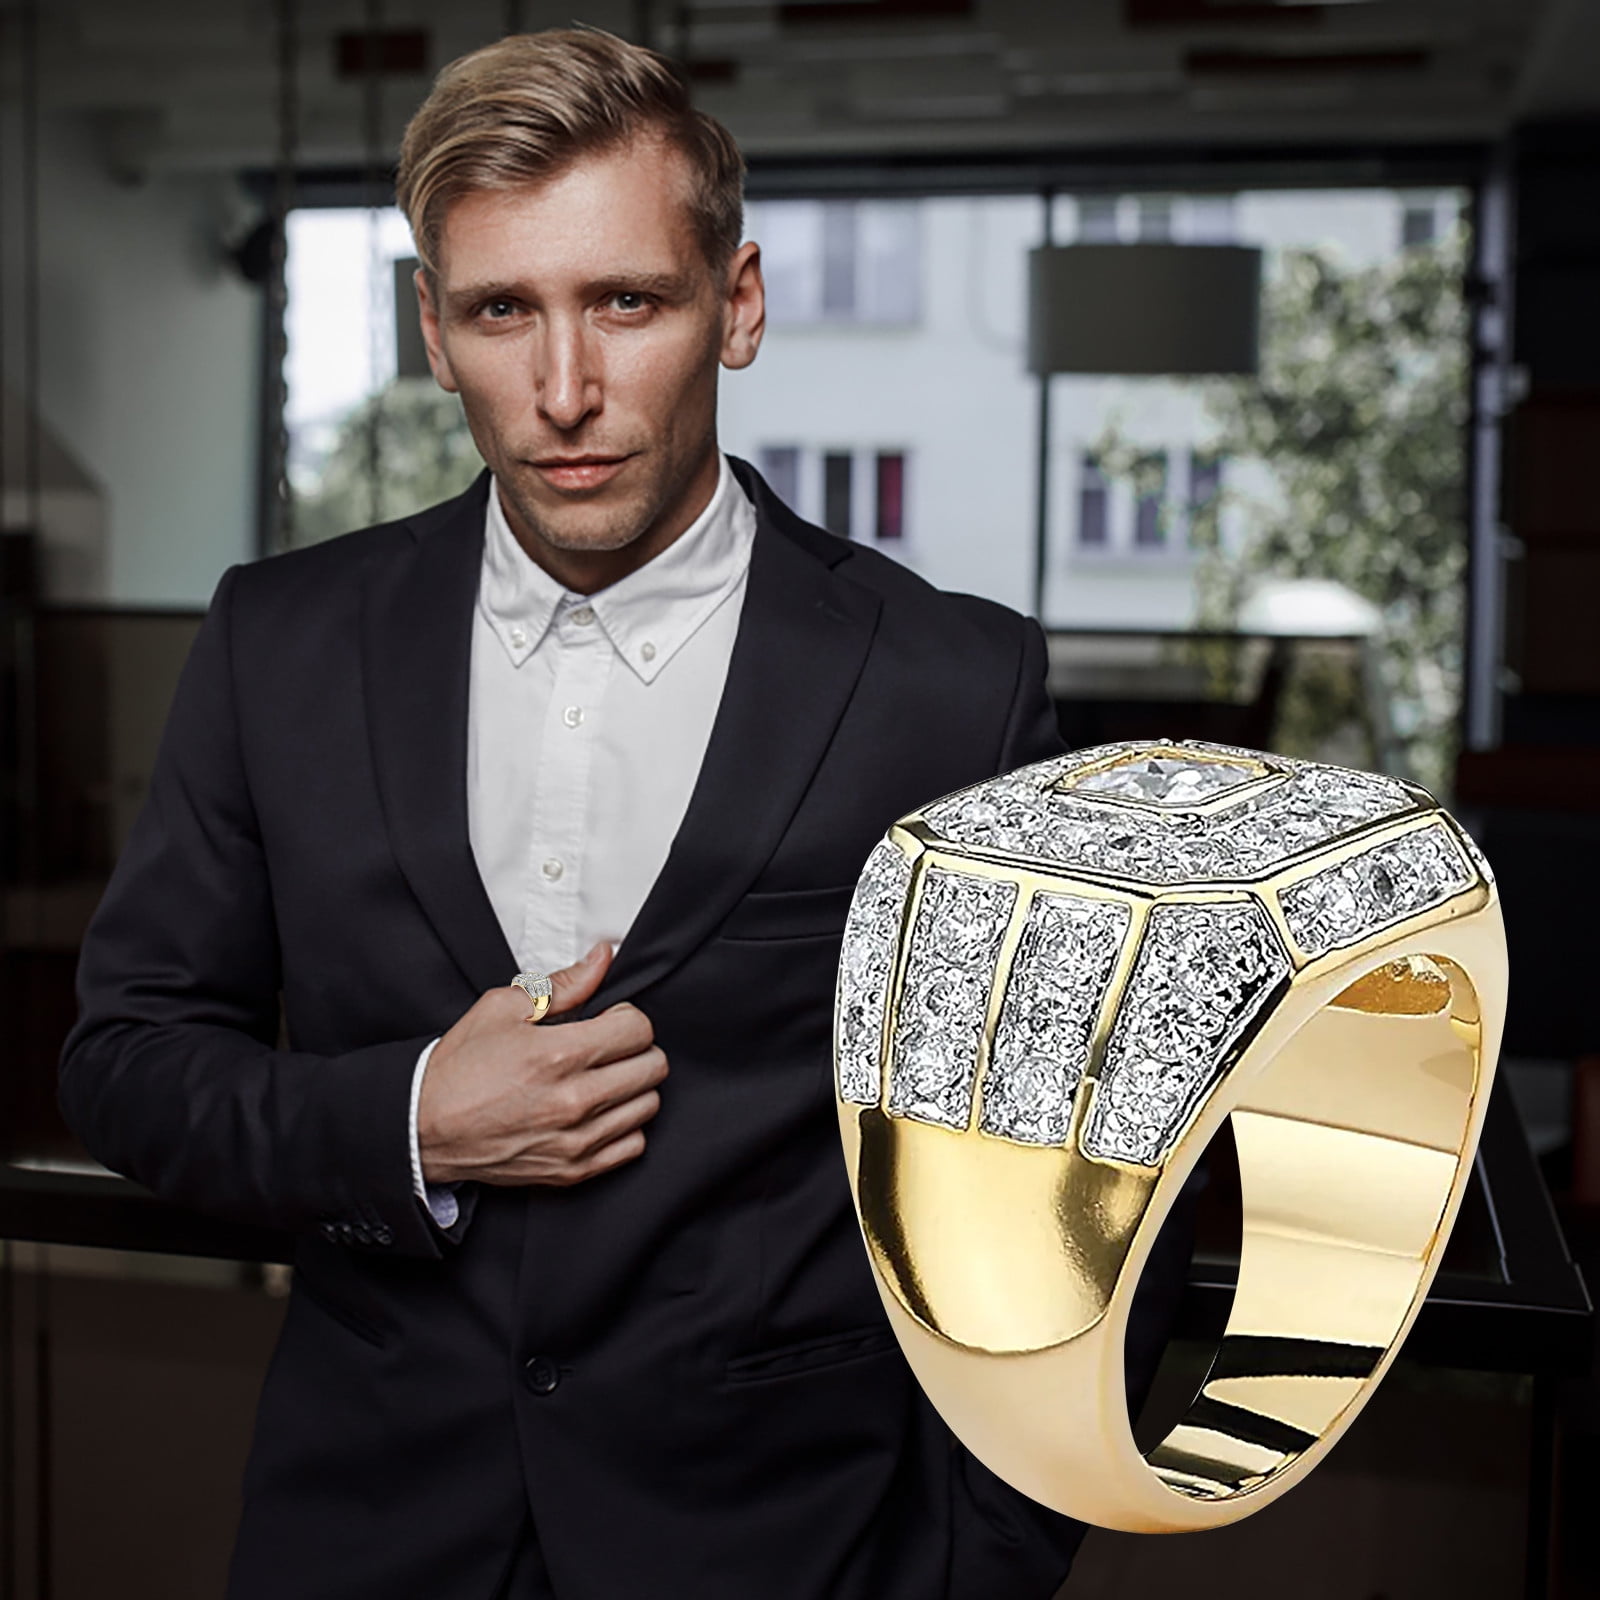 Amazon.com: Personalized Gold Stainless Steel Wedding Ring Couple's Ring  Set Custom Engraved Free - Ships from USA: Clothing, Shoes & Jewelry